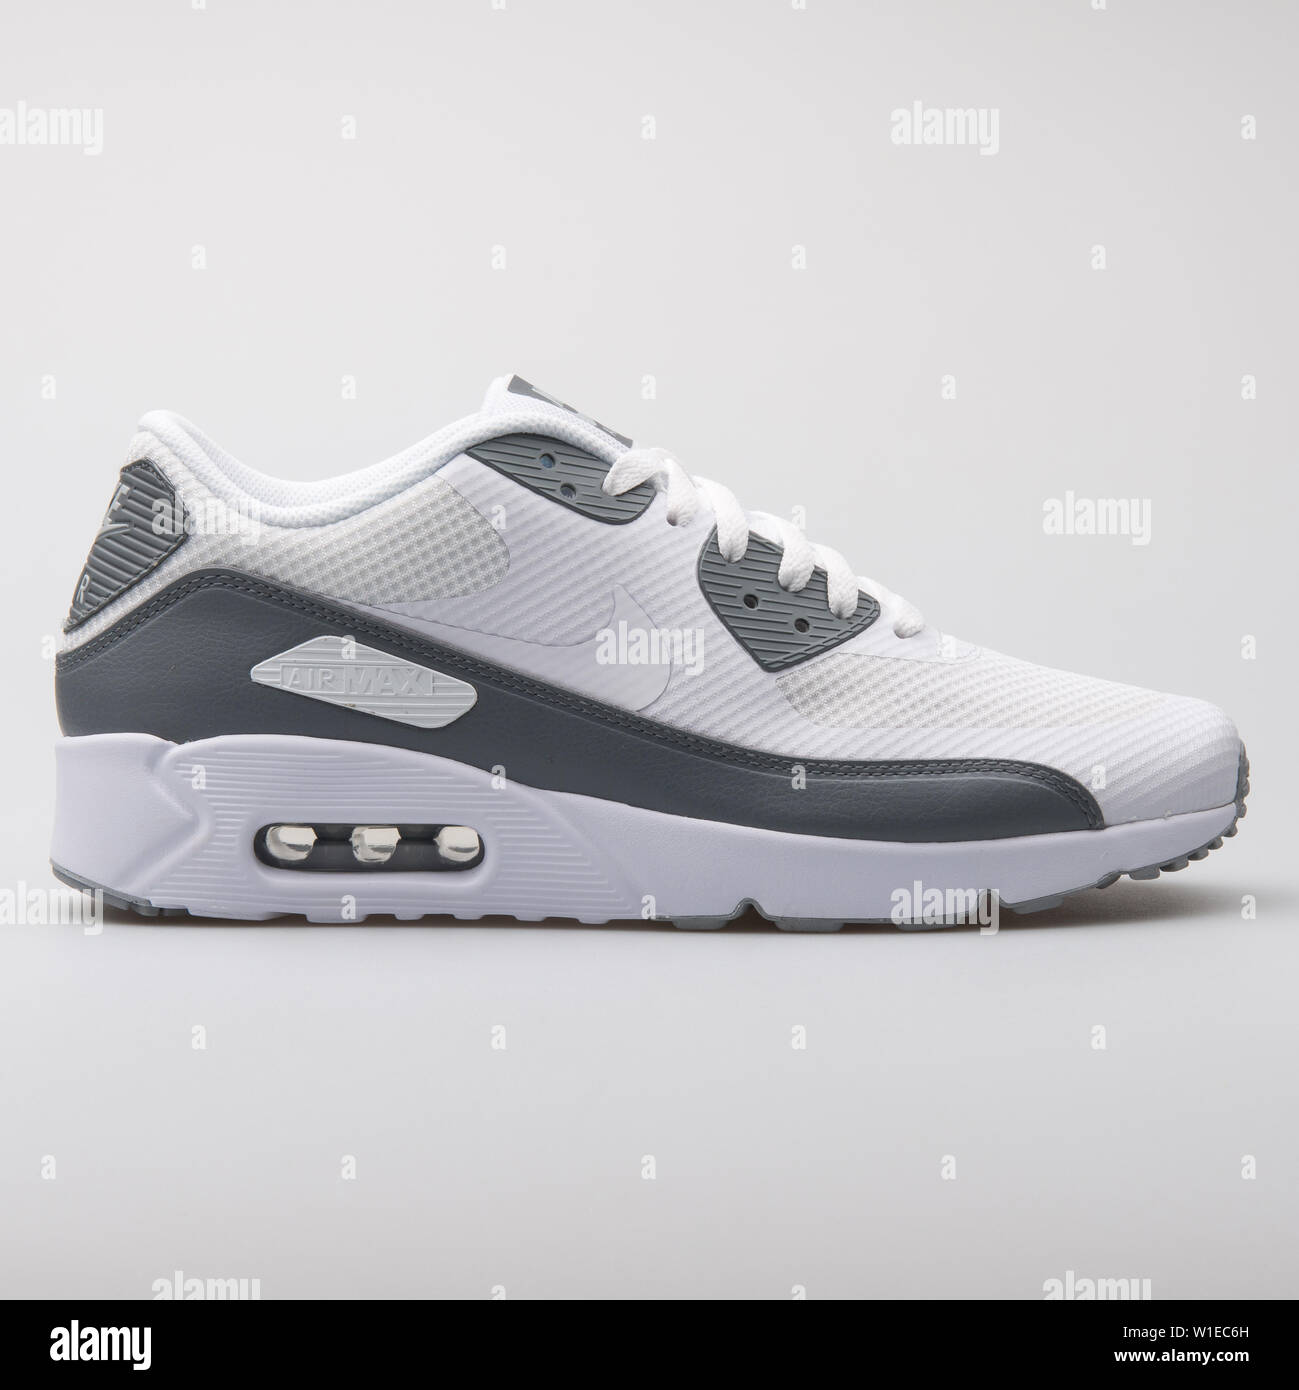 VIENNA, AUSTRIA - AUGUST 7, 2017: Nike Air Max 90 Ultra 2.0 Essential white  and grey sneaker on white background Stock Photo - Alamy